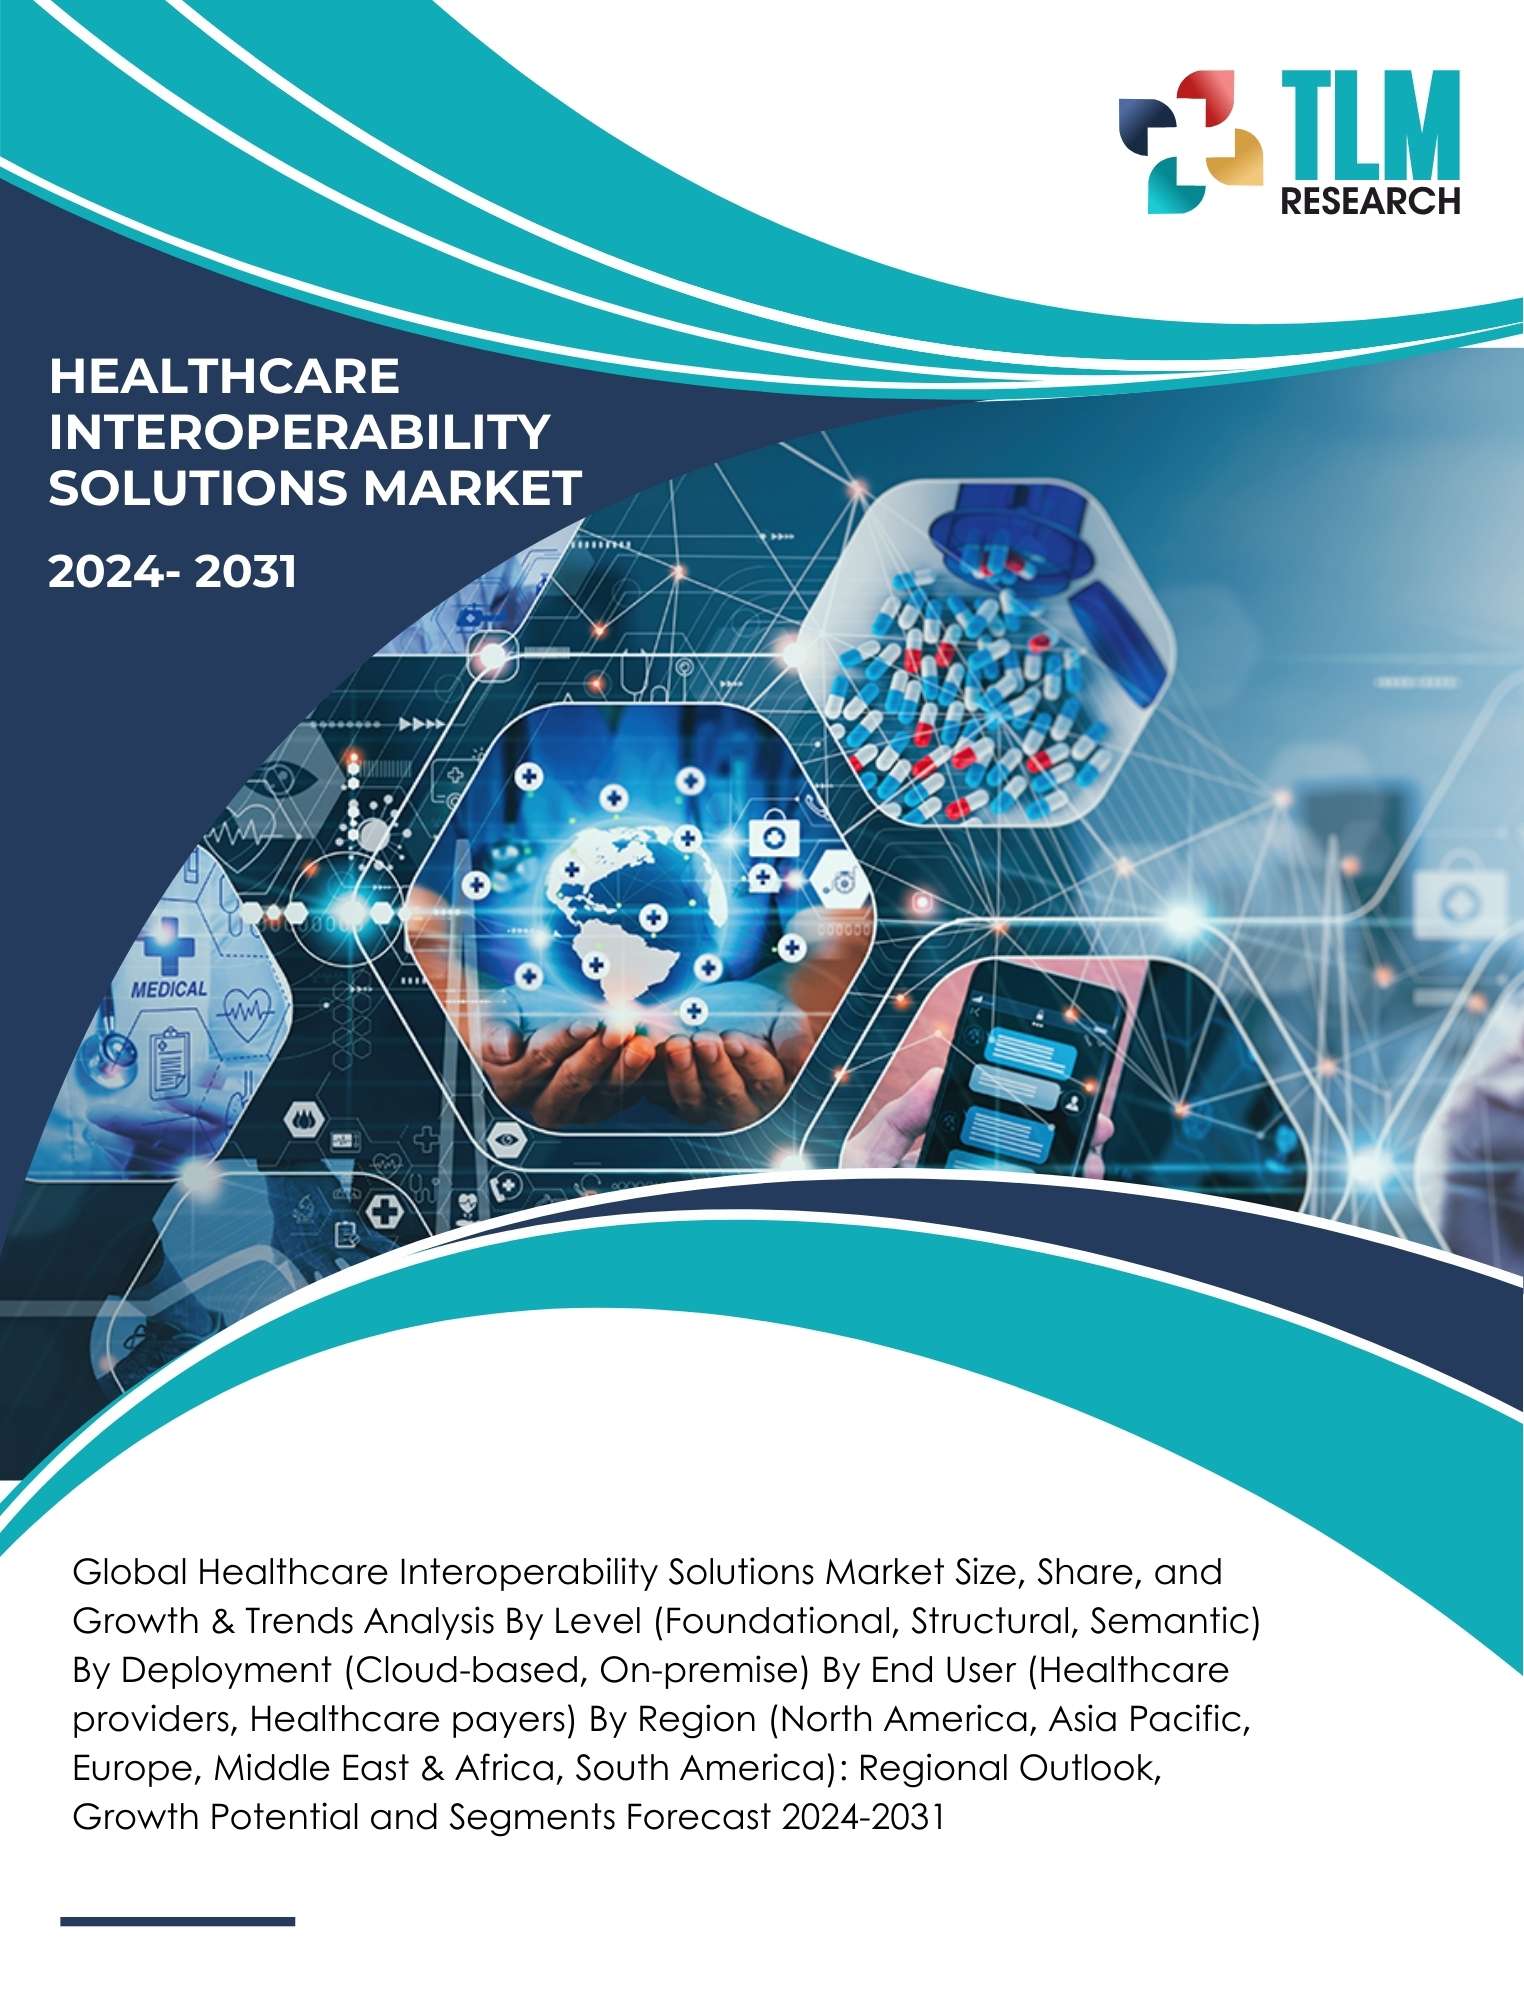 Healthcare Interoperability Solutions Market Global Industry Analysis | 2031 | TLM Research